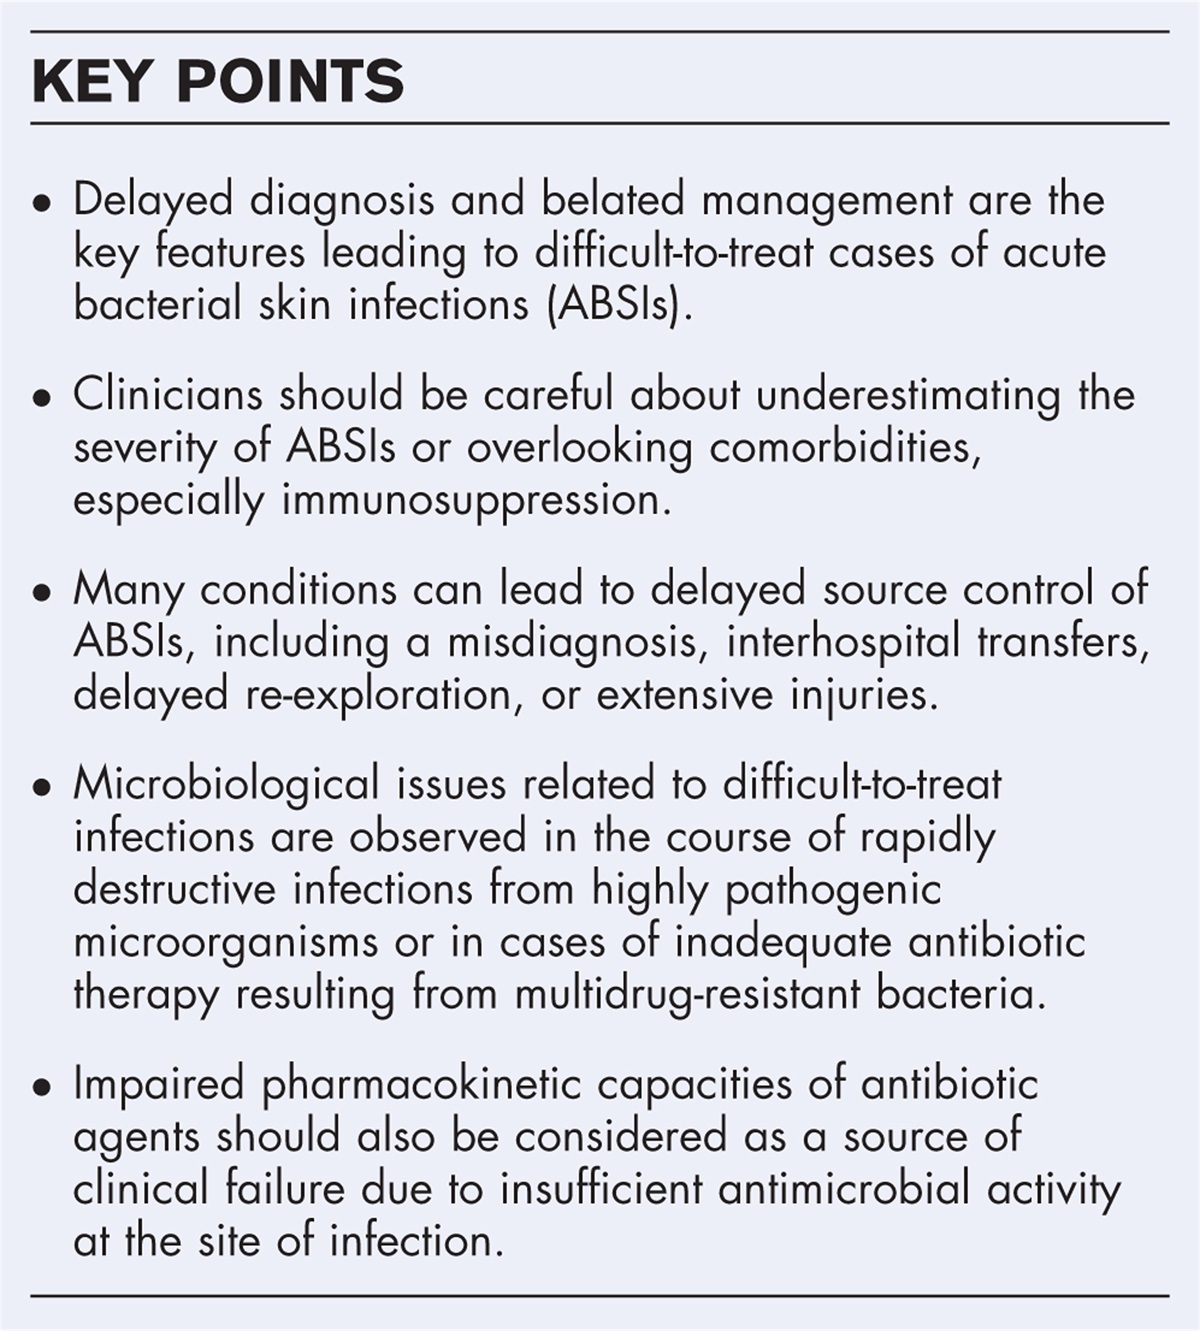 Identifying patients with difficult-to-treat acute bacterial skin infections